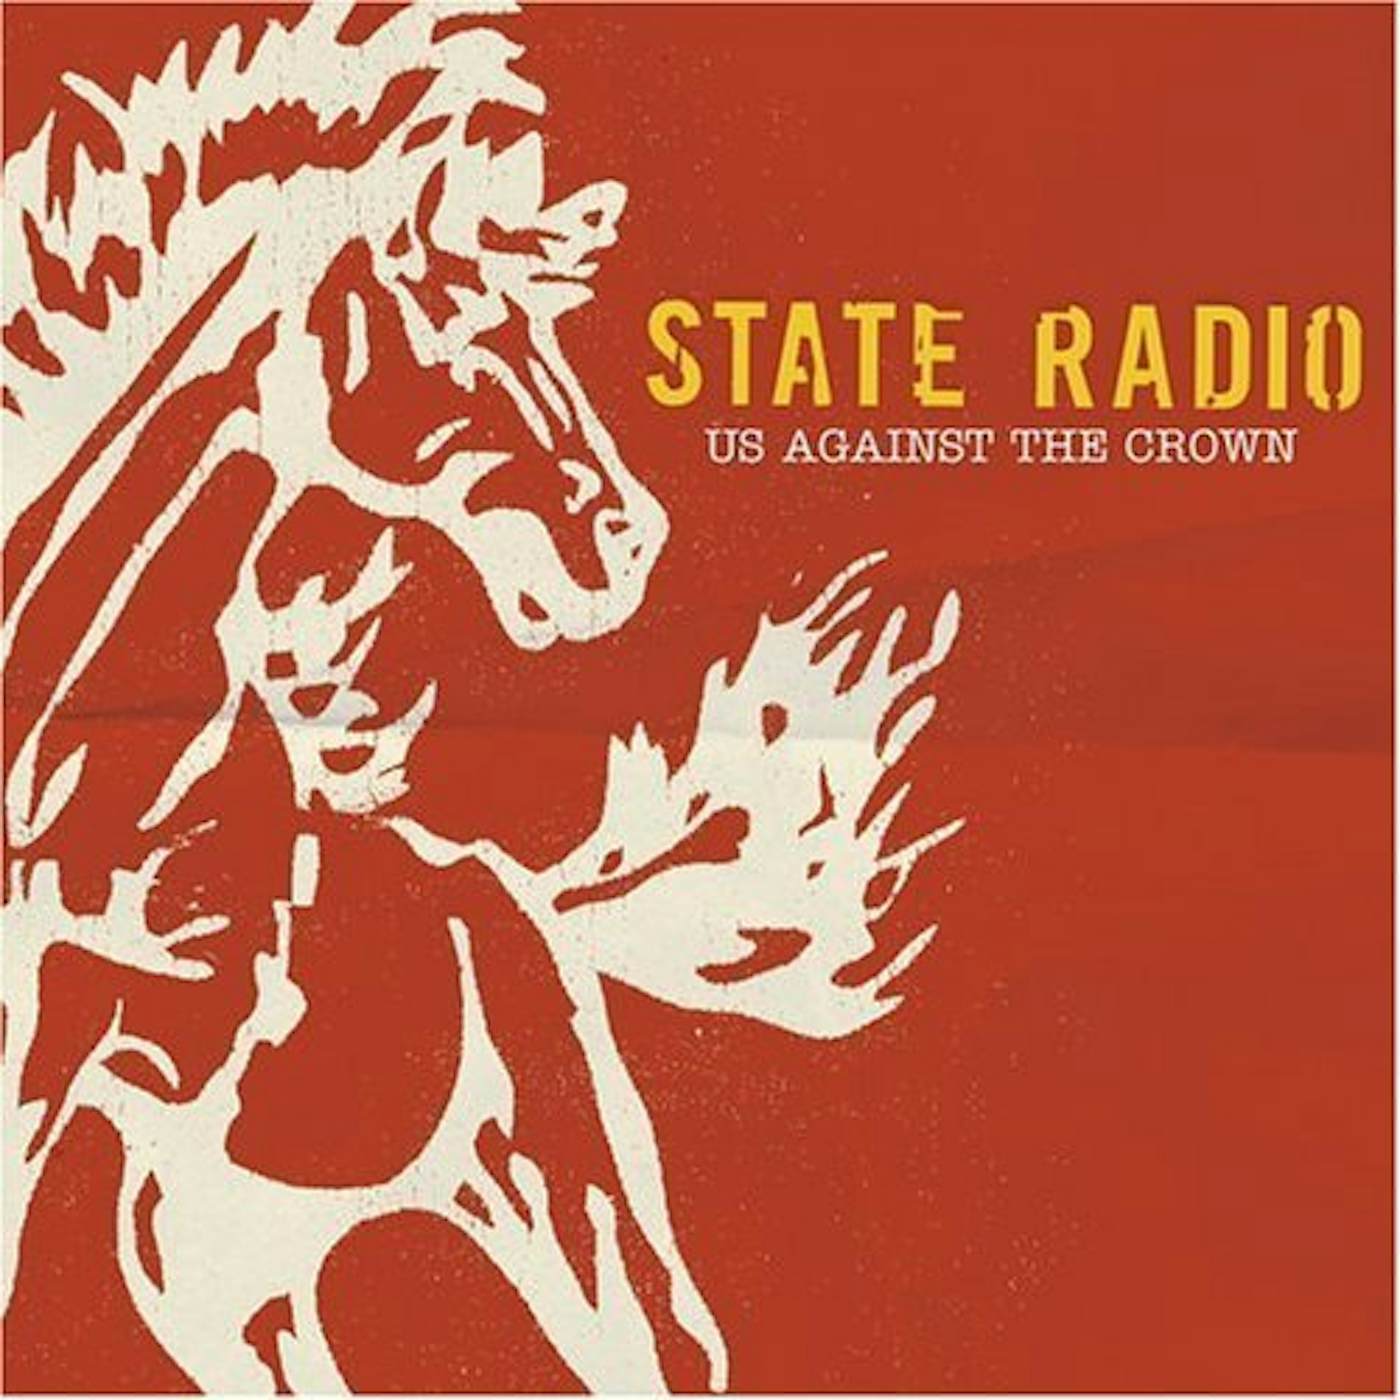 State Radio US AGAINST THE CROWN CD